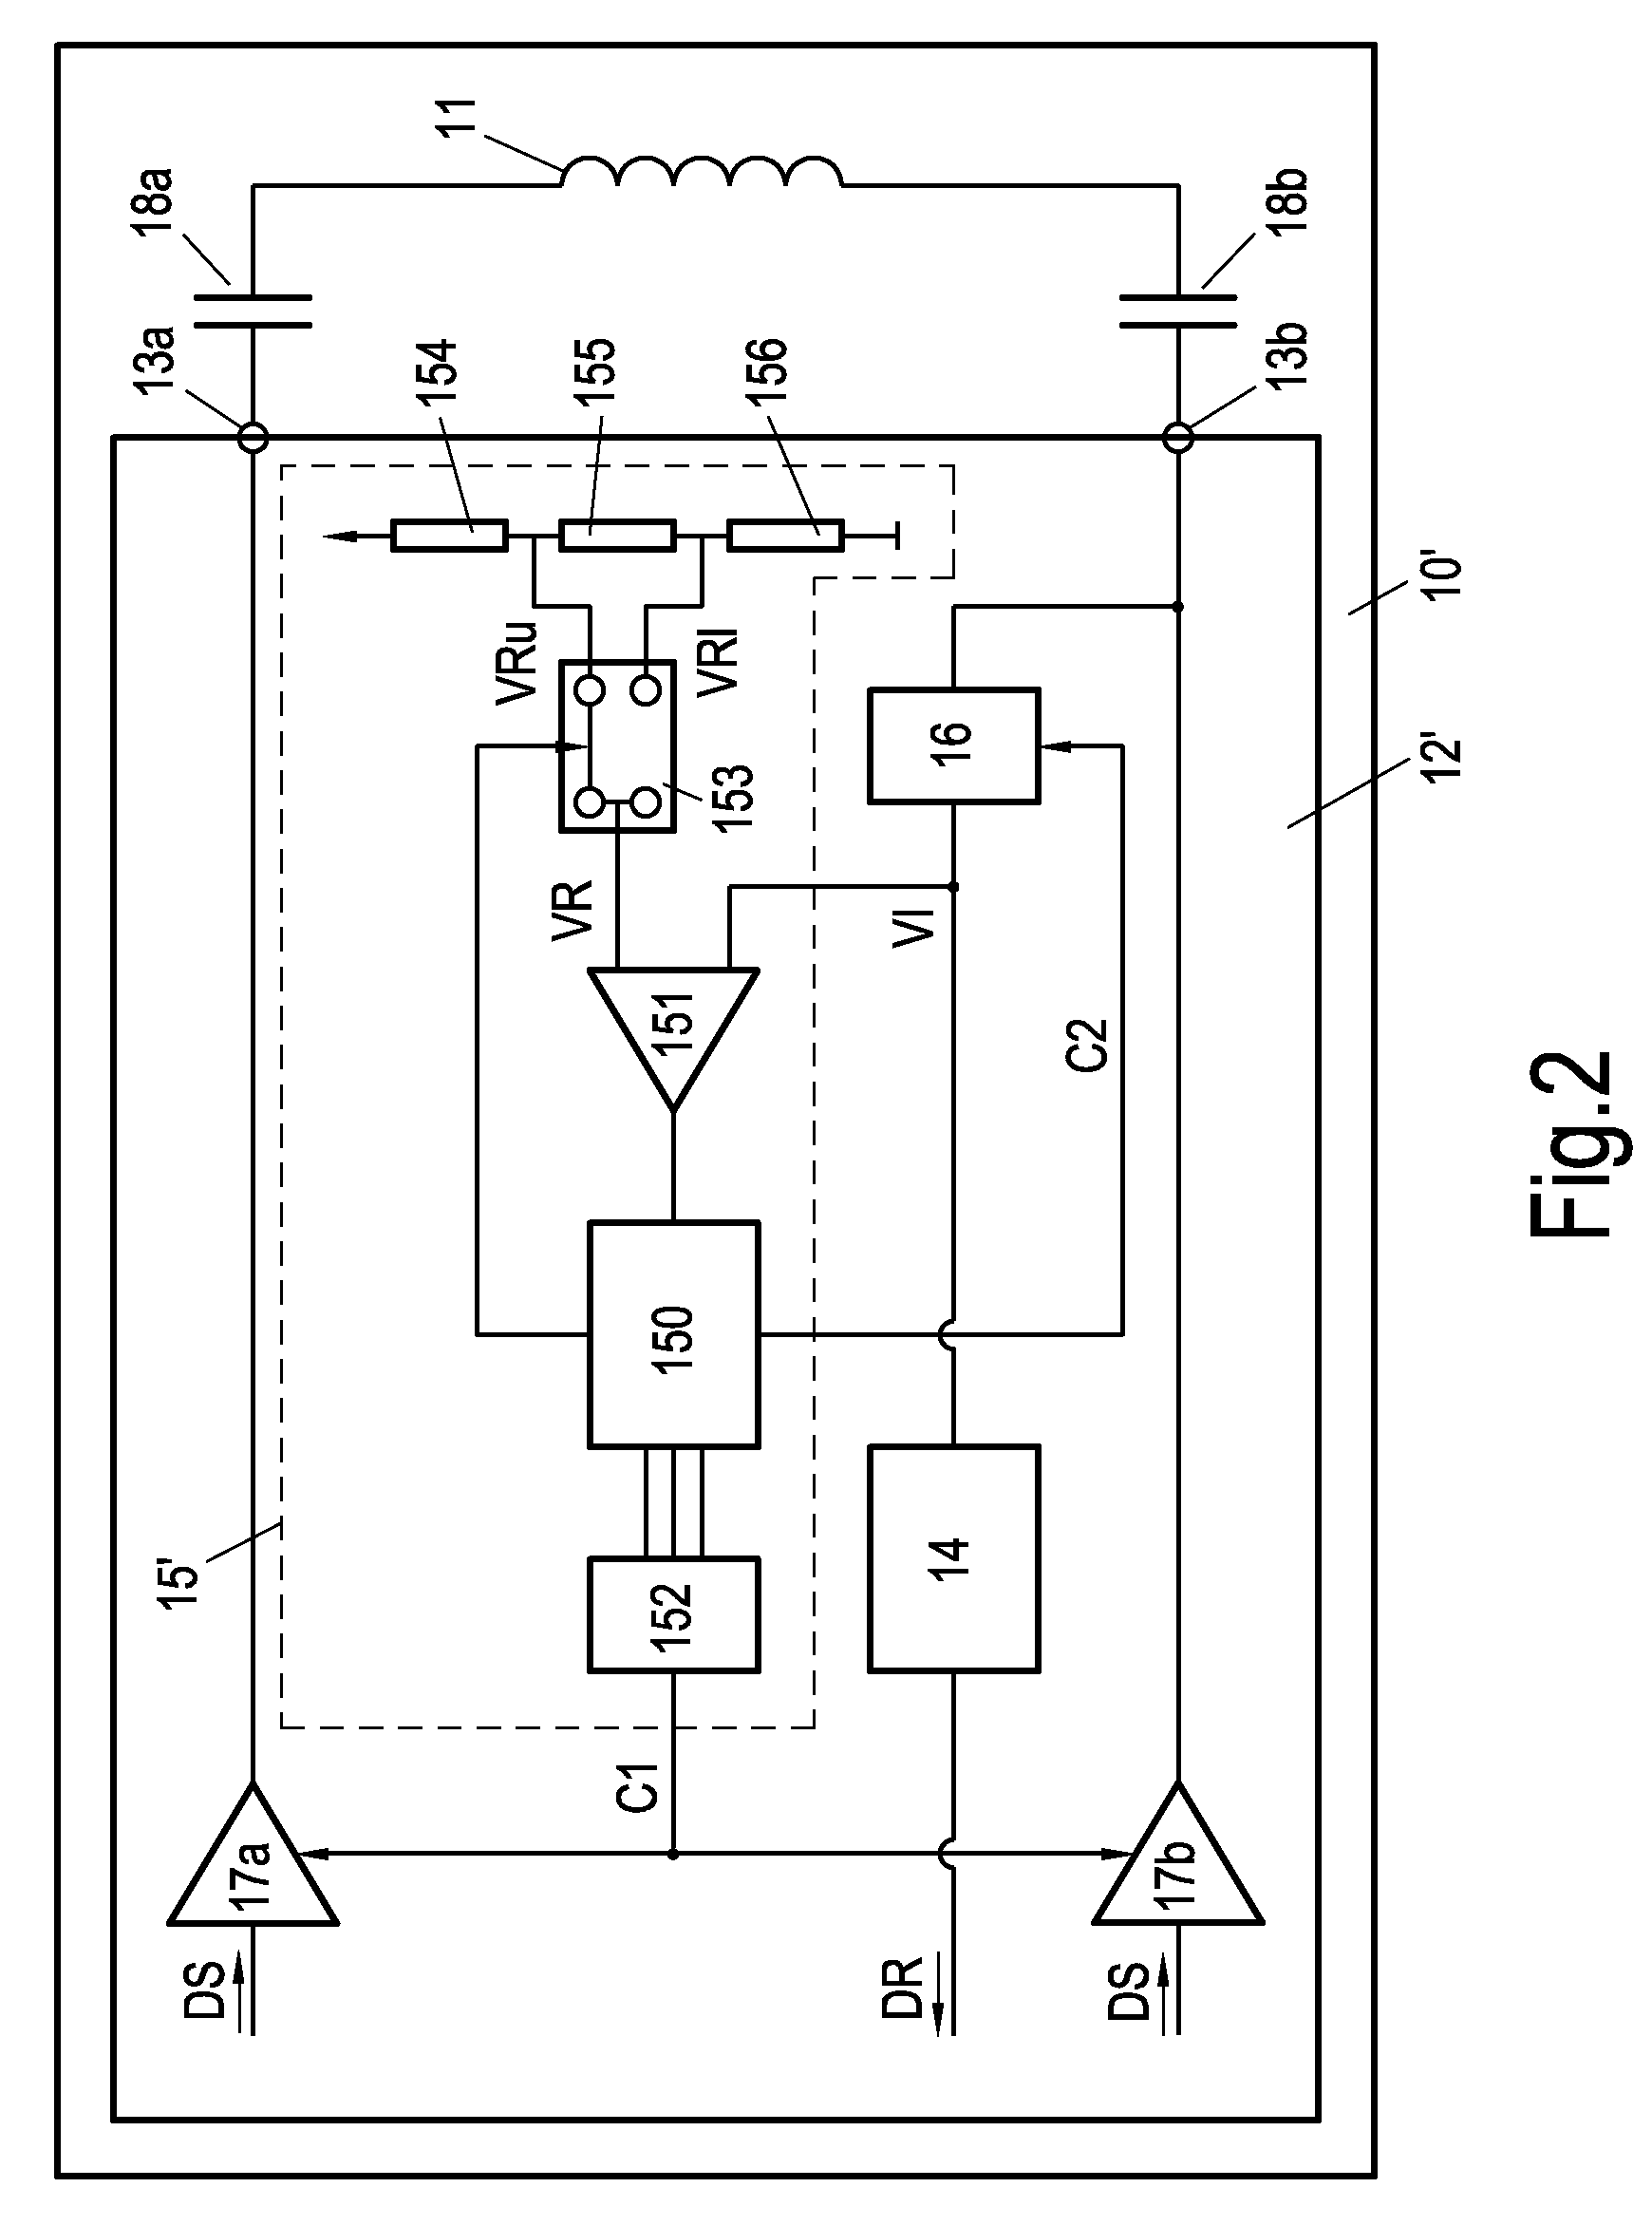 Electronic circuit for a contactless reader device